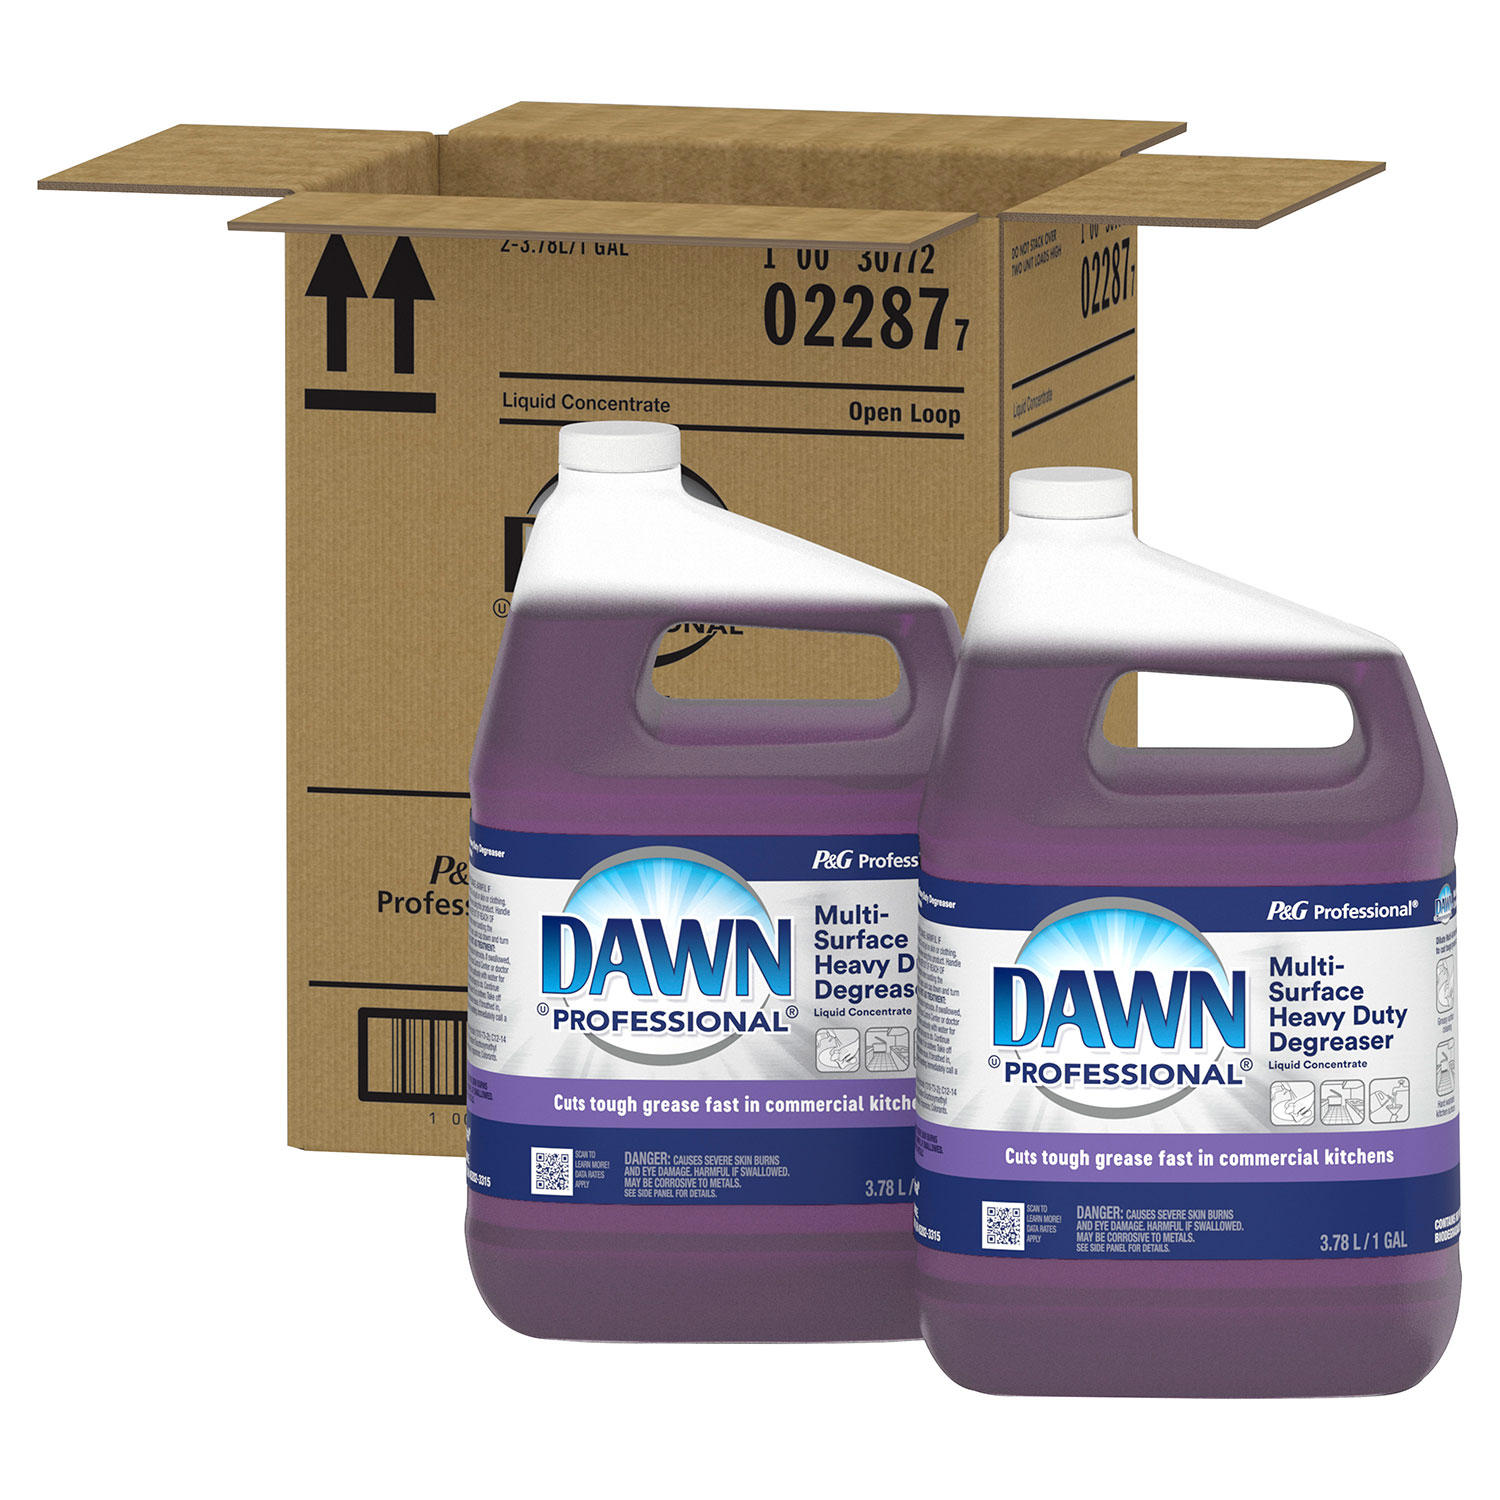 2-Count Dawn Professional Multi-Surface Heavy Duty Degreaser, 1 gal.